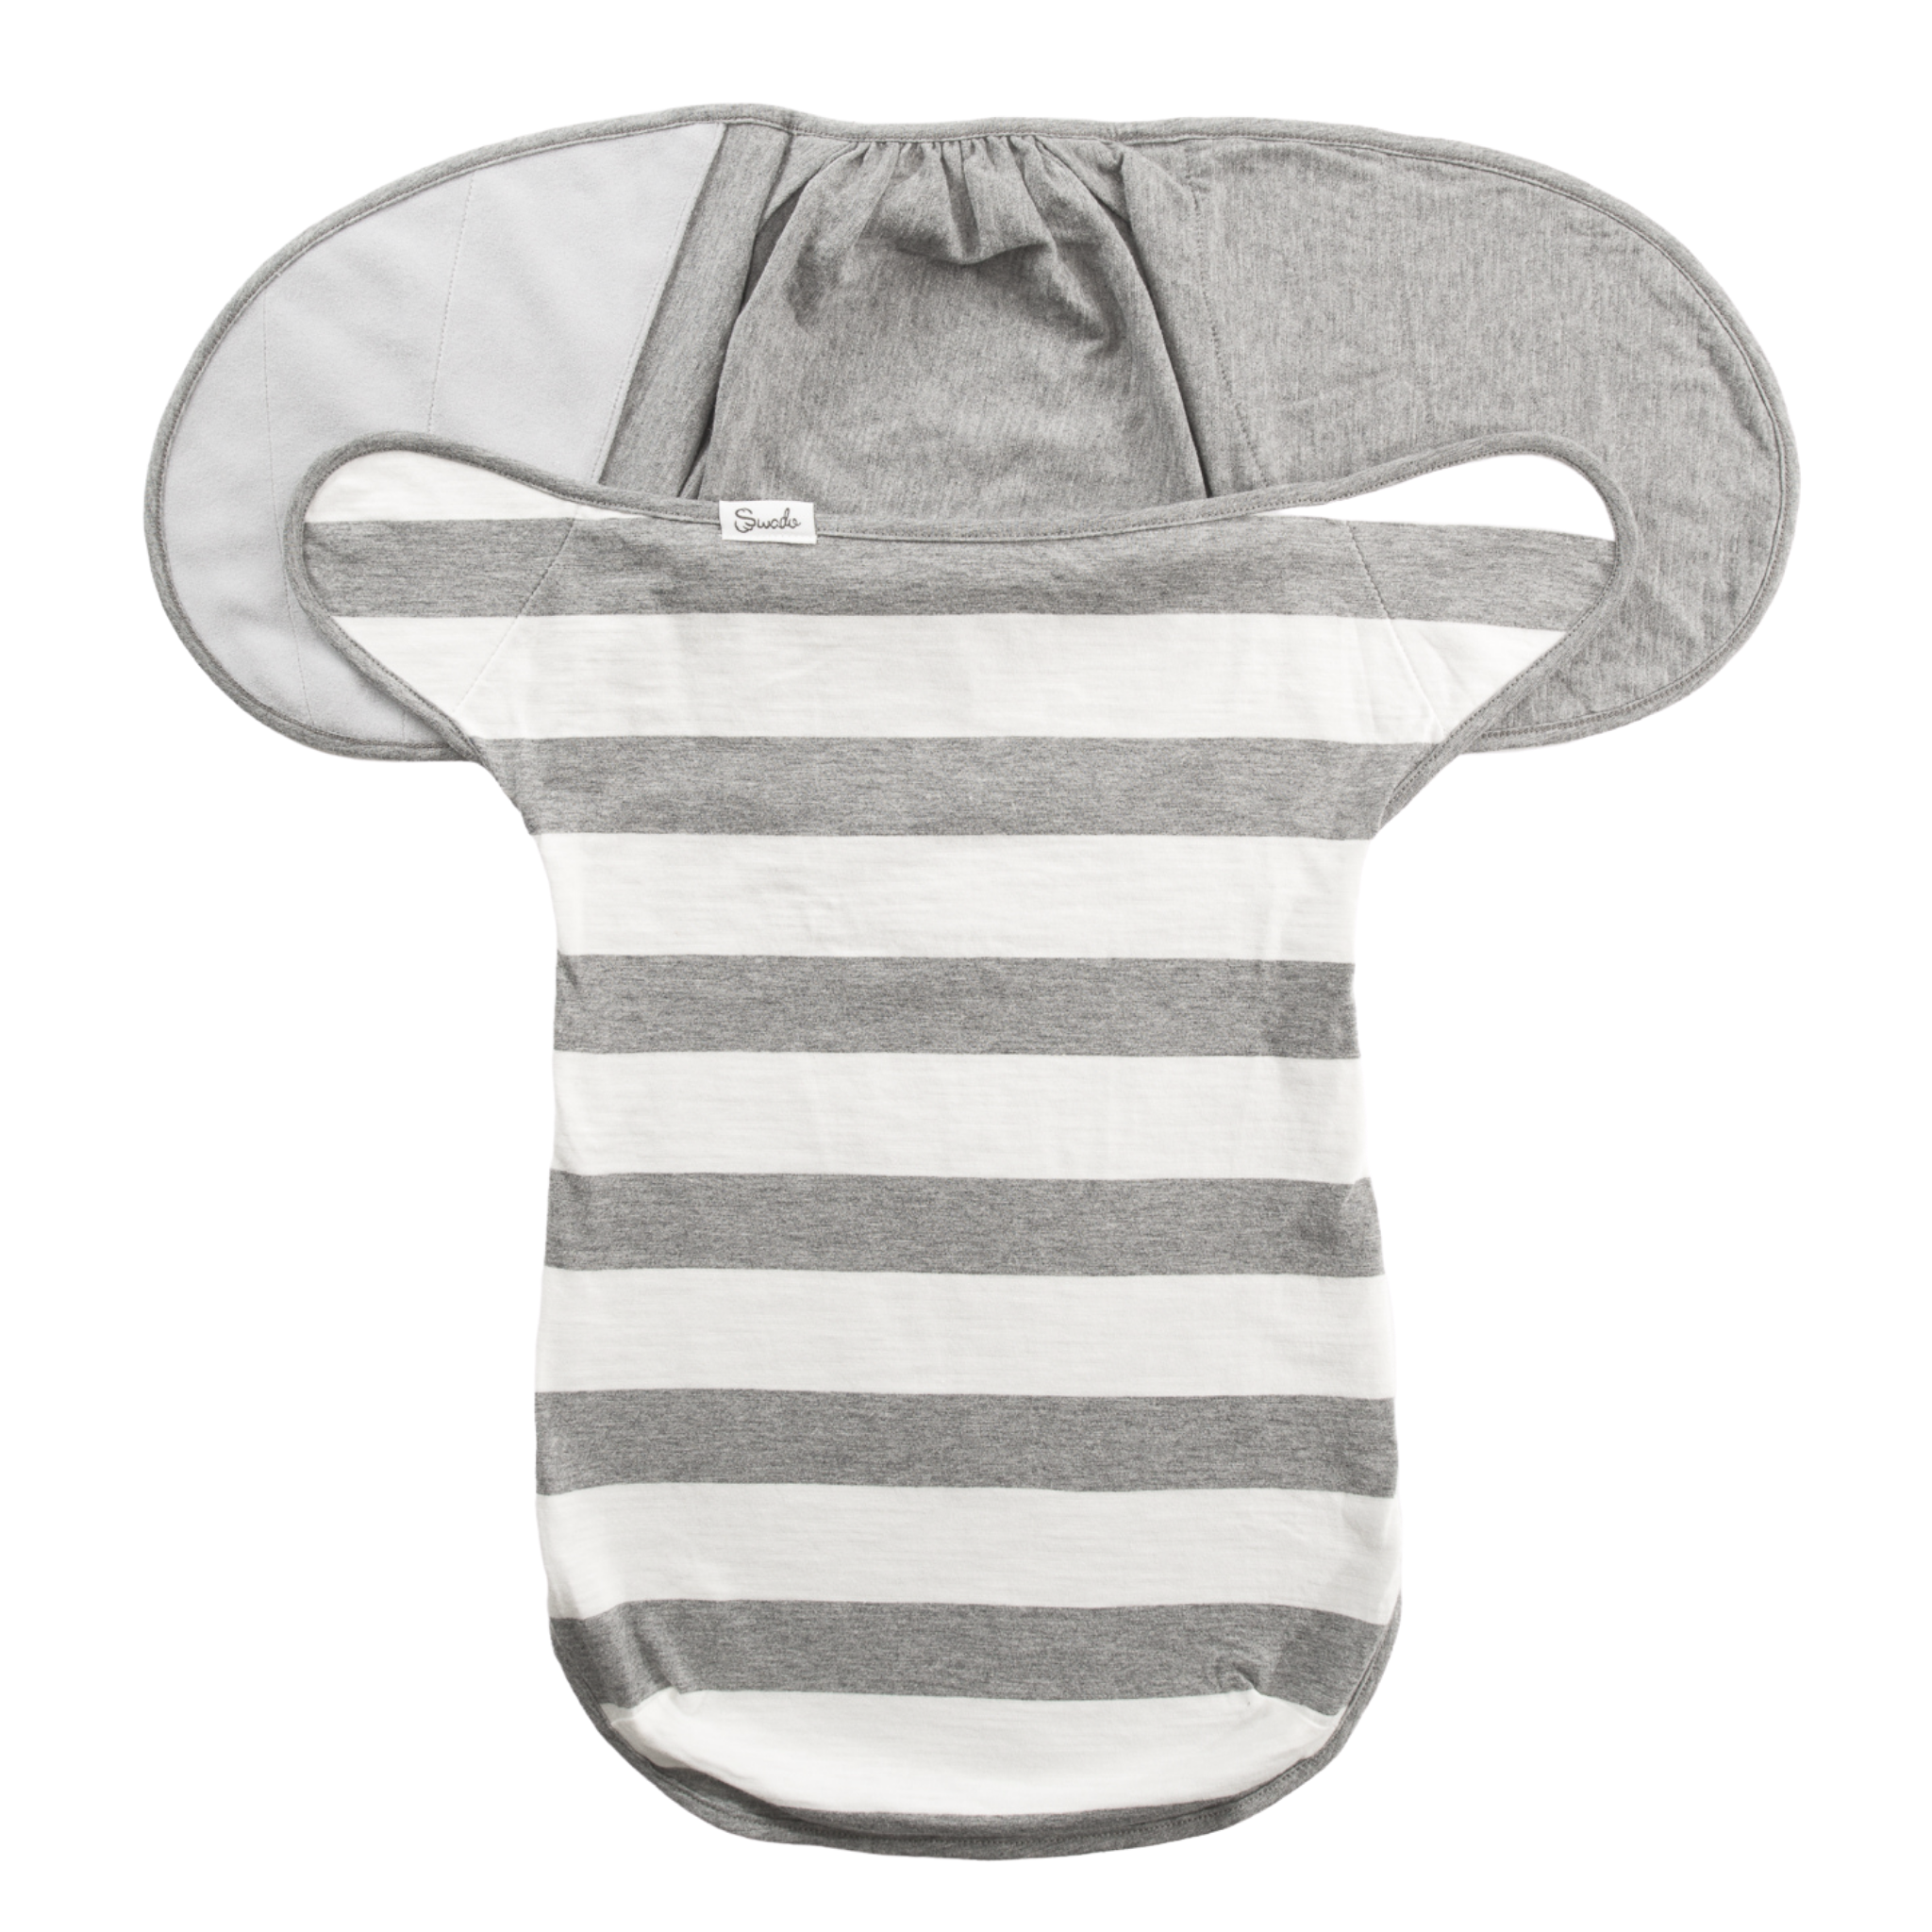 Silent, Soft, & Secure — Swado calms baby without disruptions